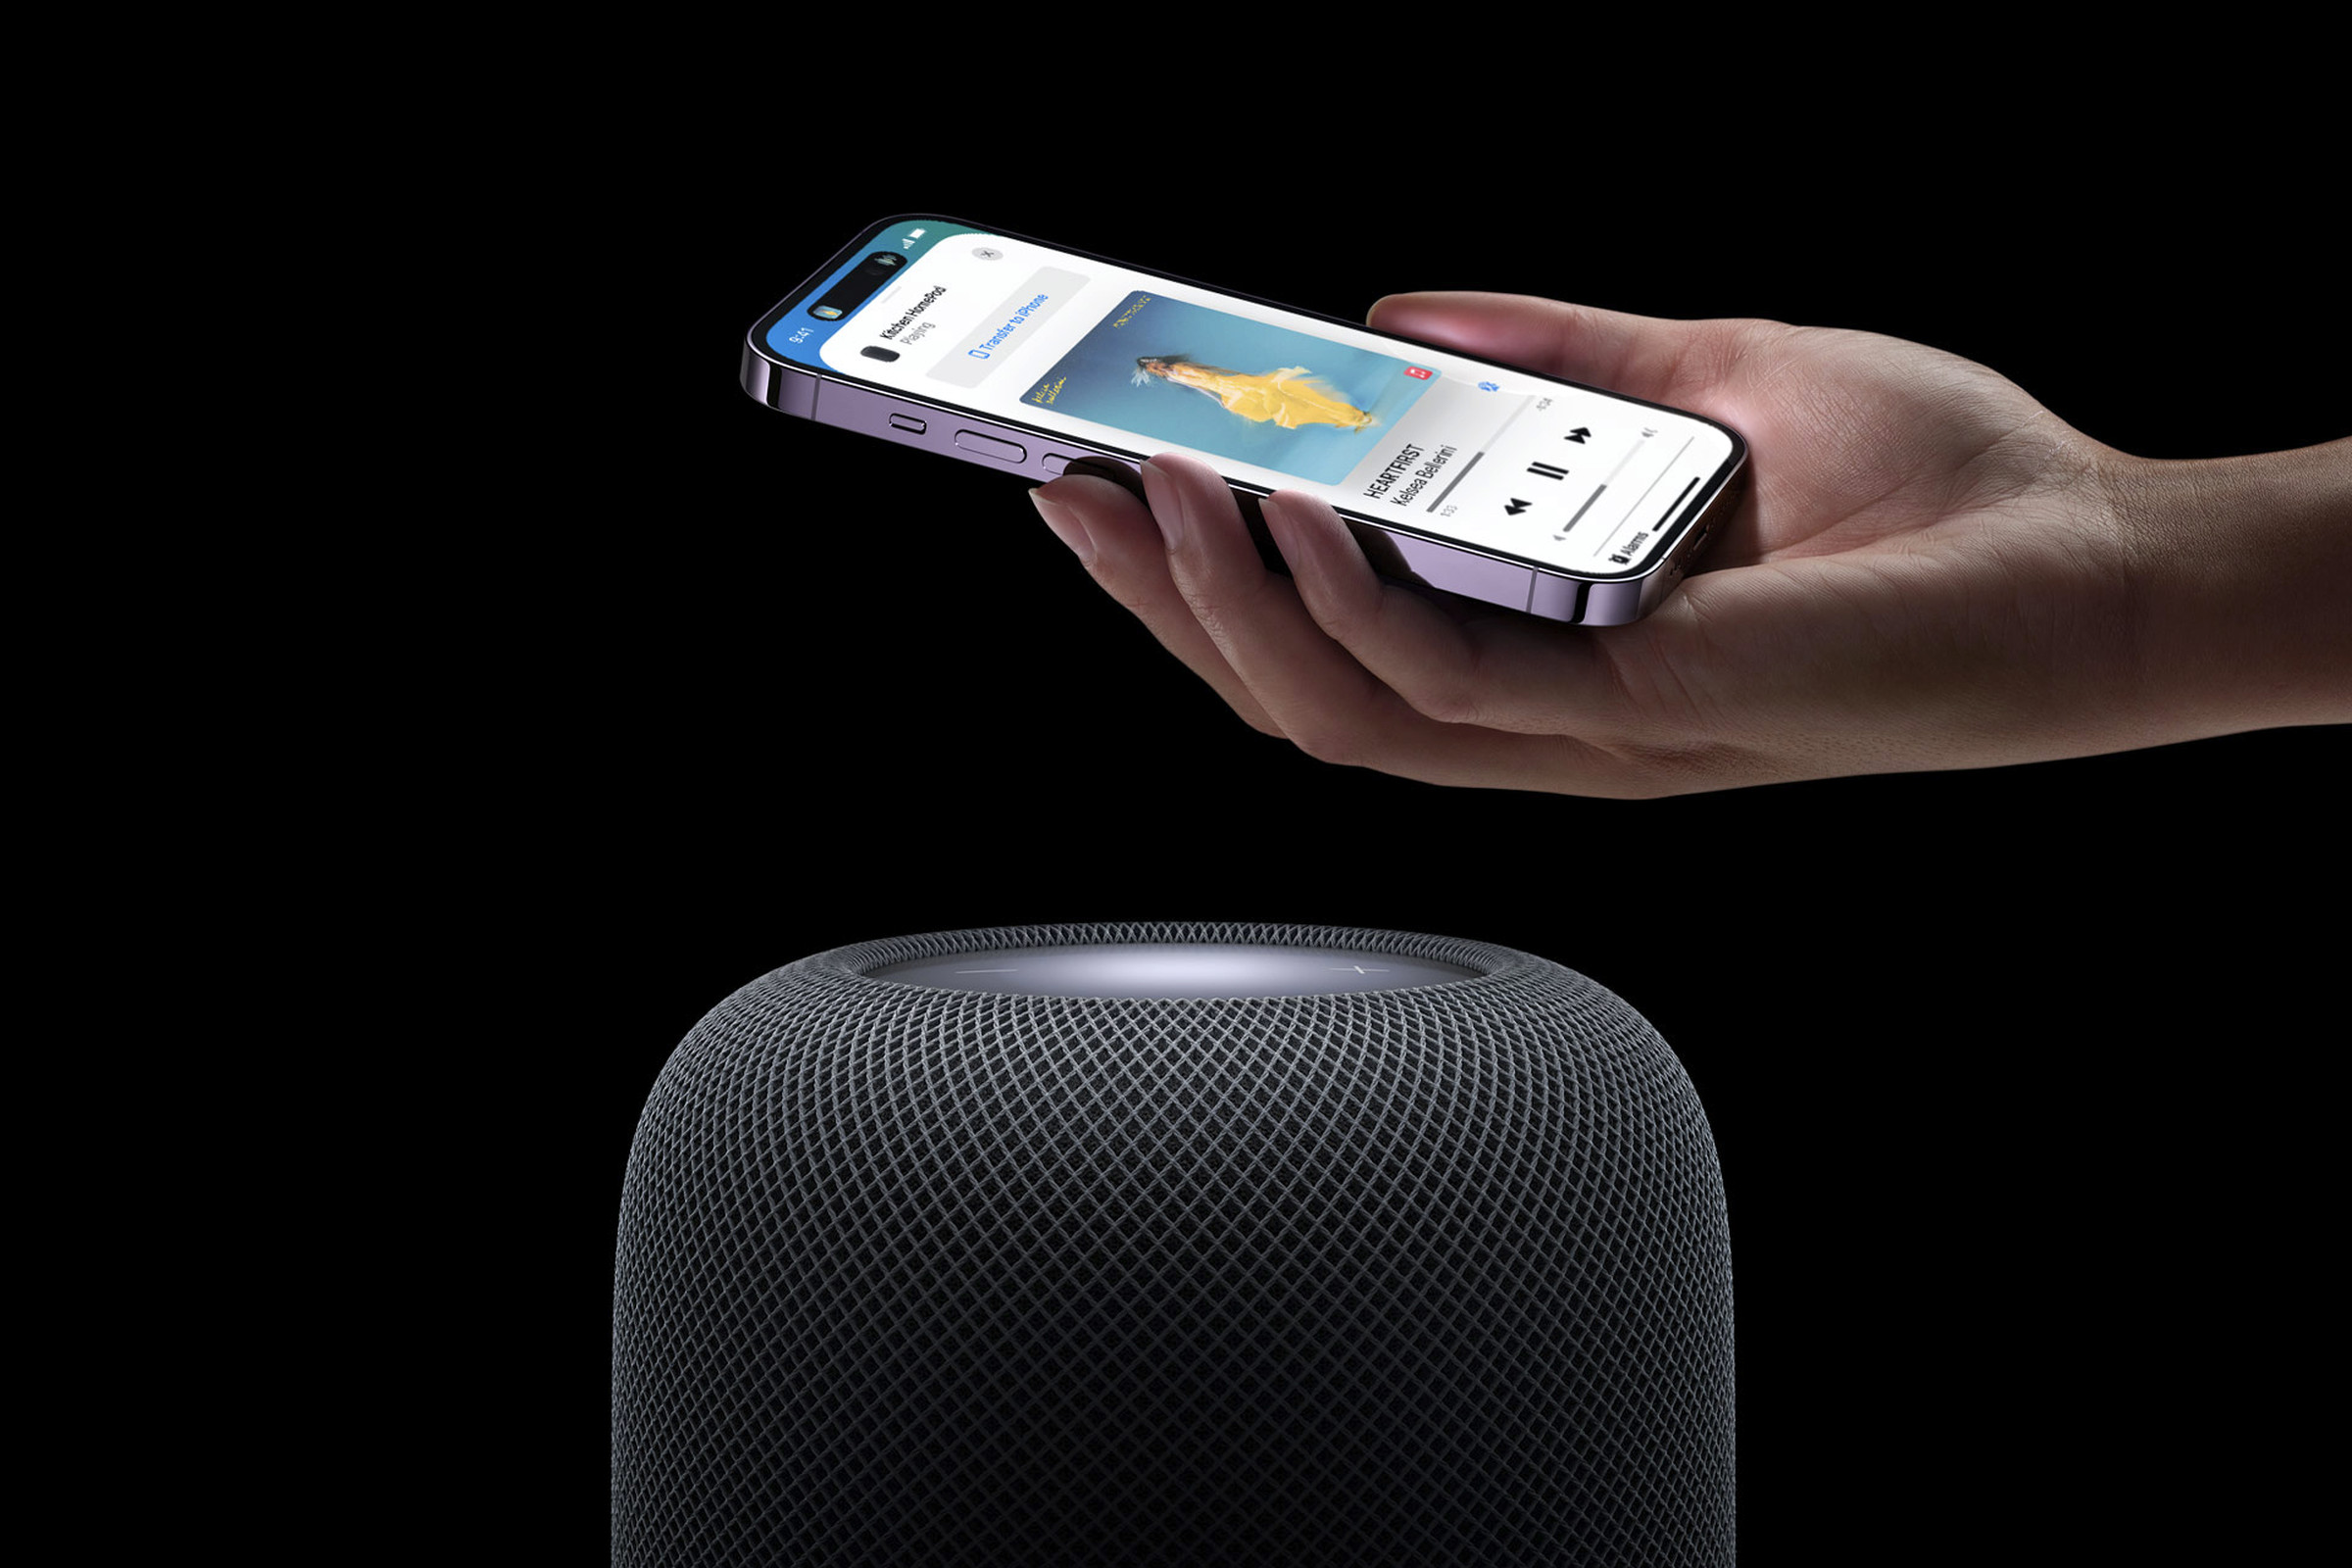 A marketing image of Apple’s second-generation HomePod with an iPhone being held above it.